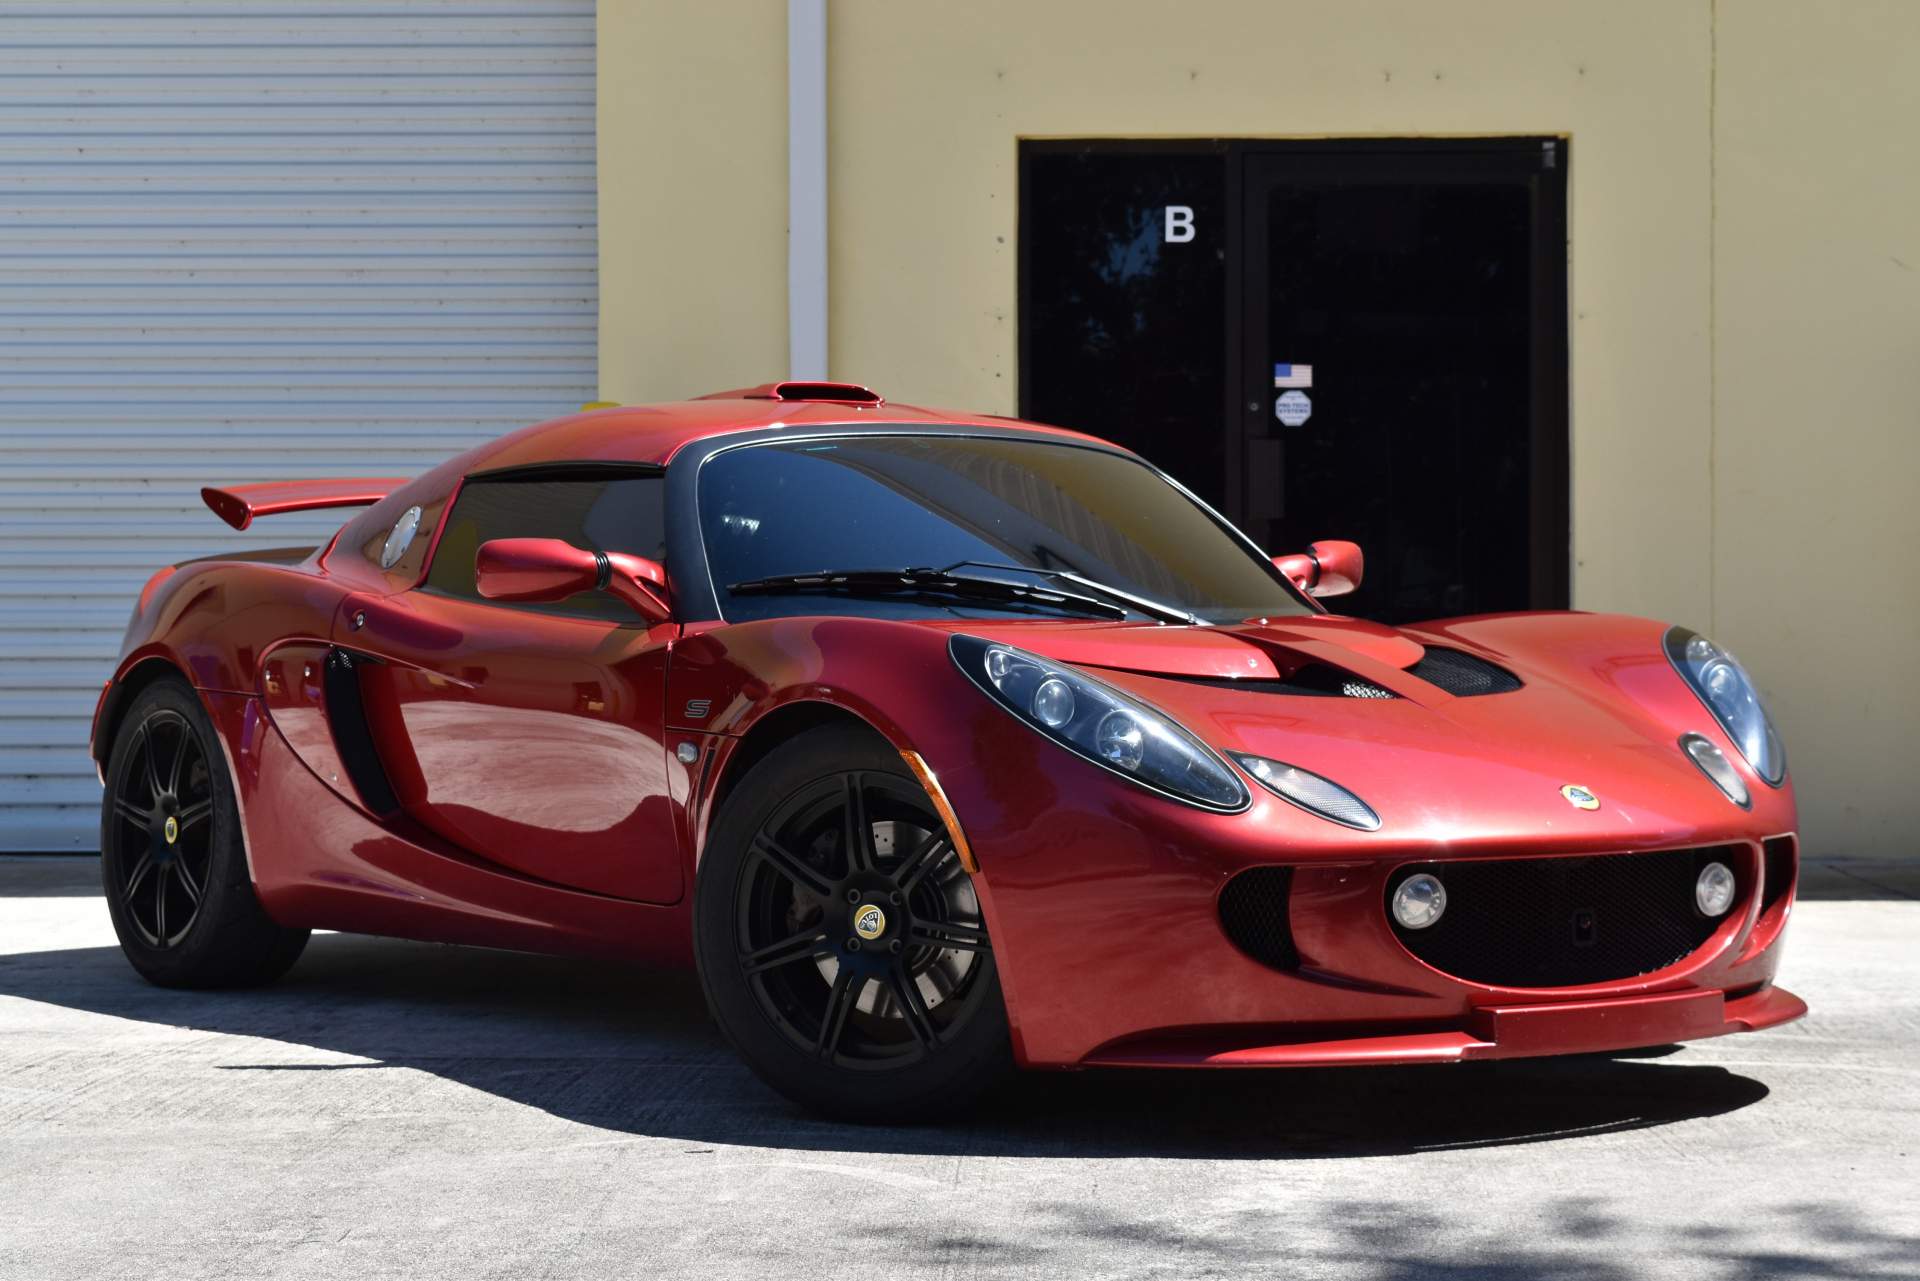 2007 Lotus Exige S Canyon Red Front.JPG